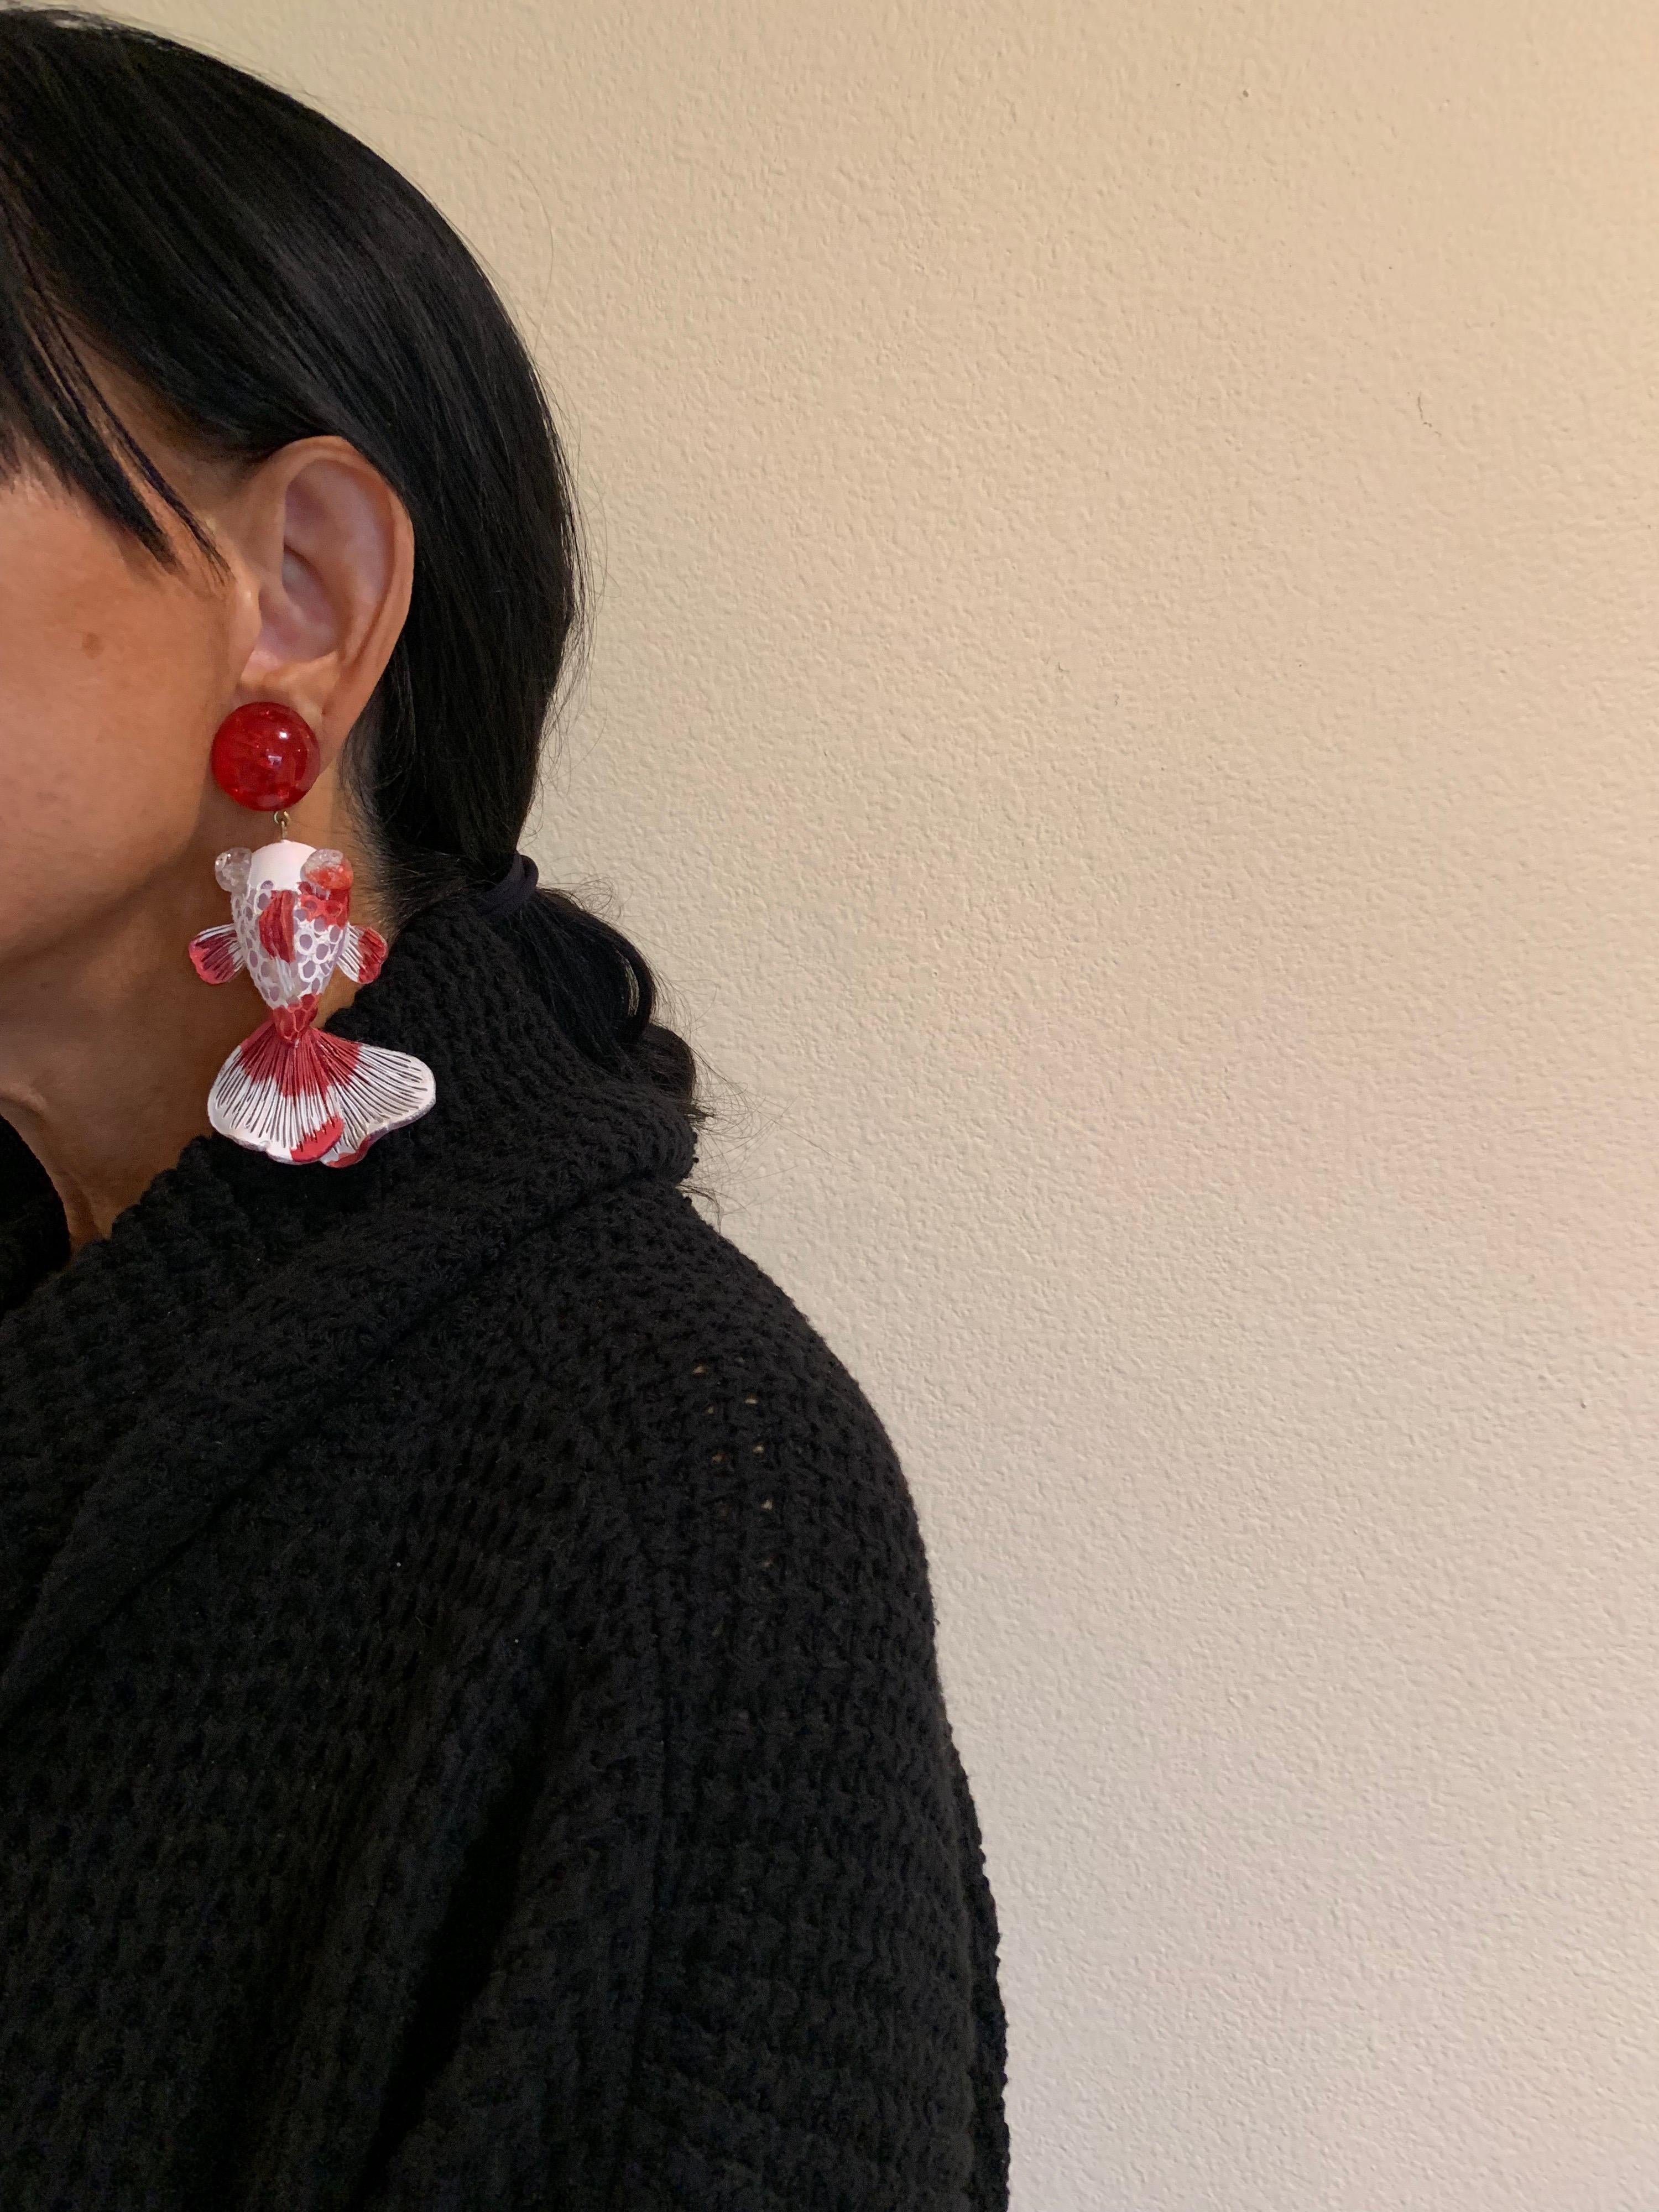 Light and easy to wear, these contemporary handmade artisanal clip-on earrings were made in Paris by Cilea. The lightweight statement earrings feature molded wave segments of enameline (enamel and resin composite) in red and white, depicting a koi